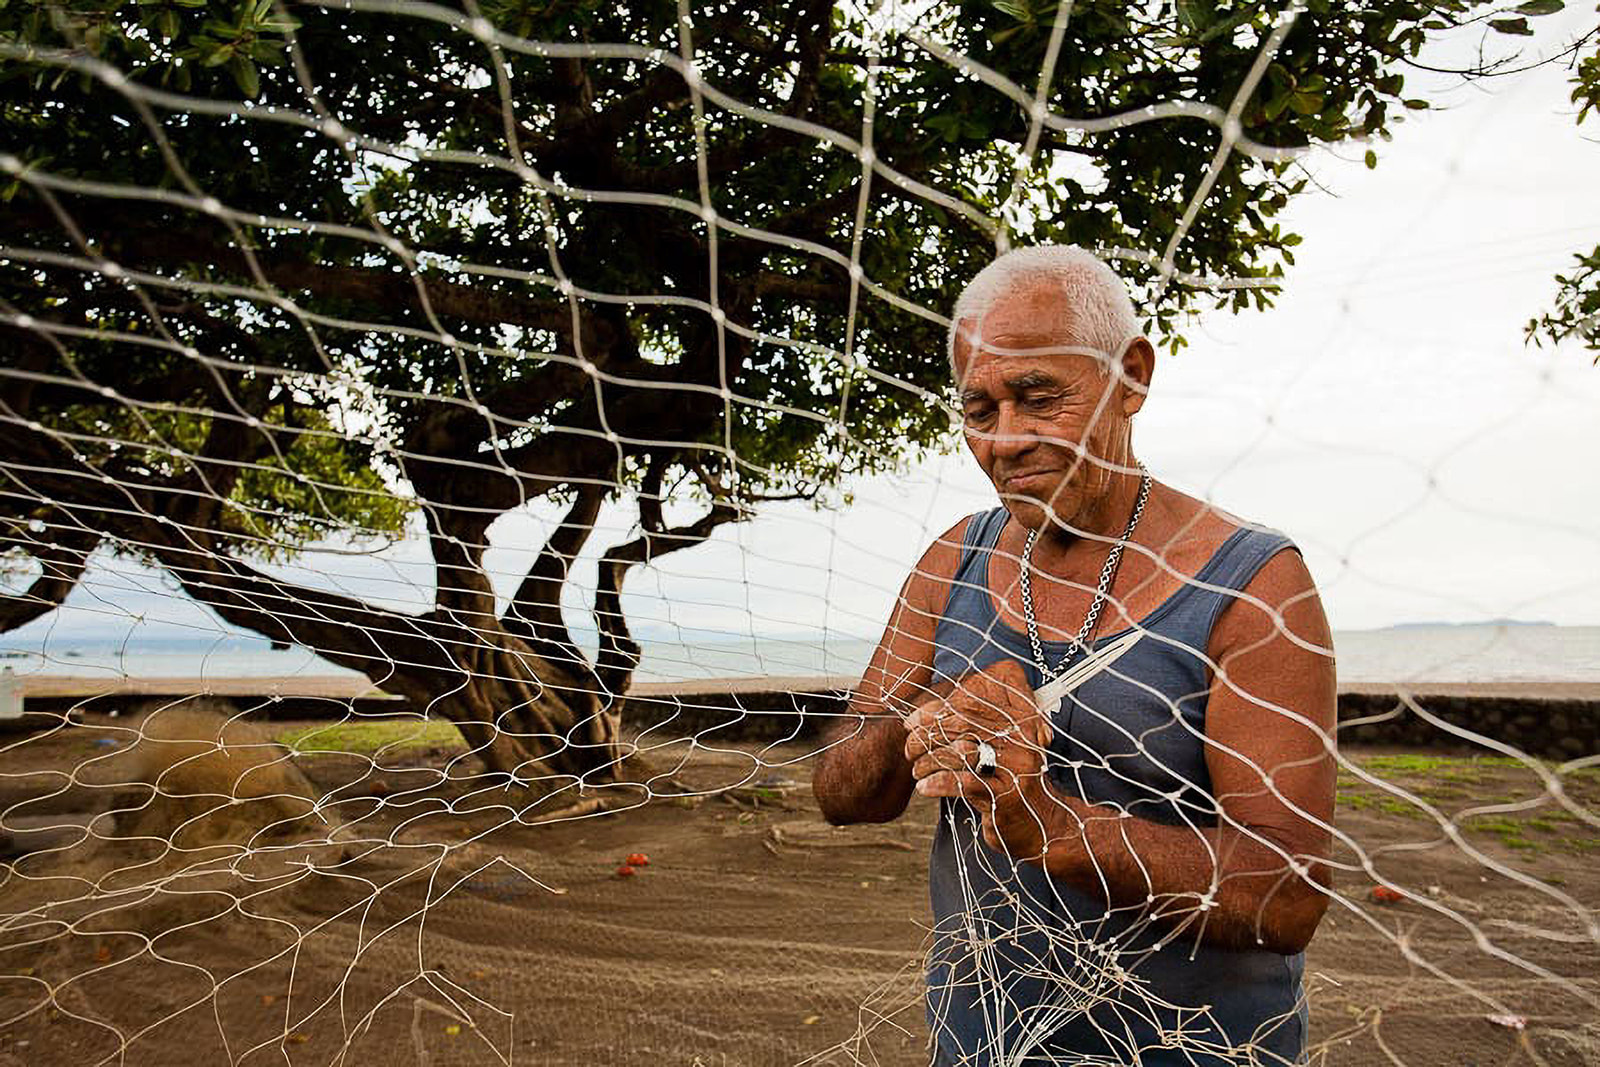 Fisherman fixing net with knife.